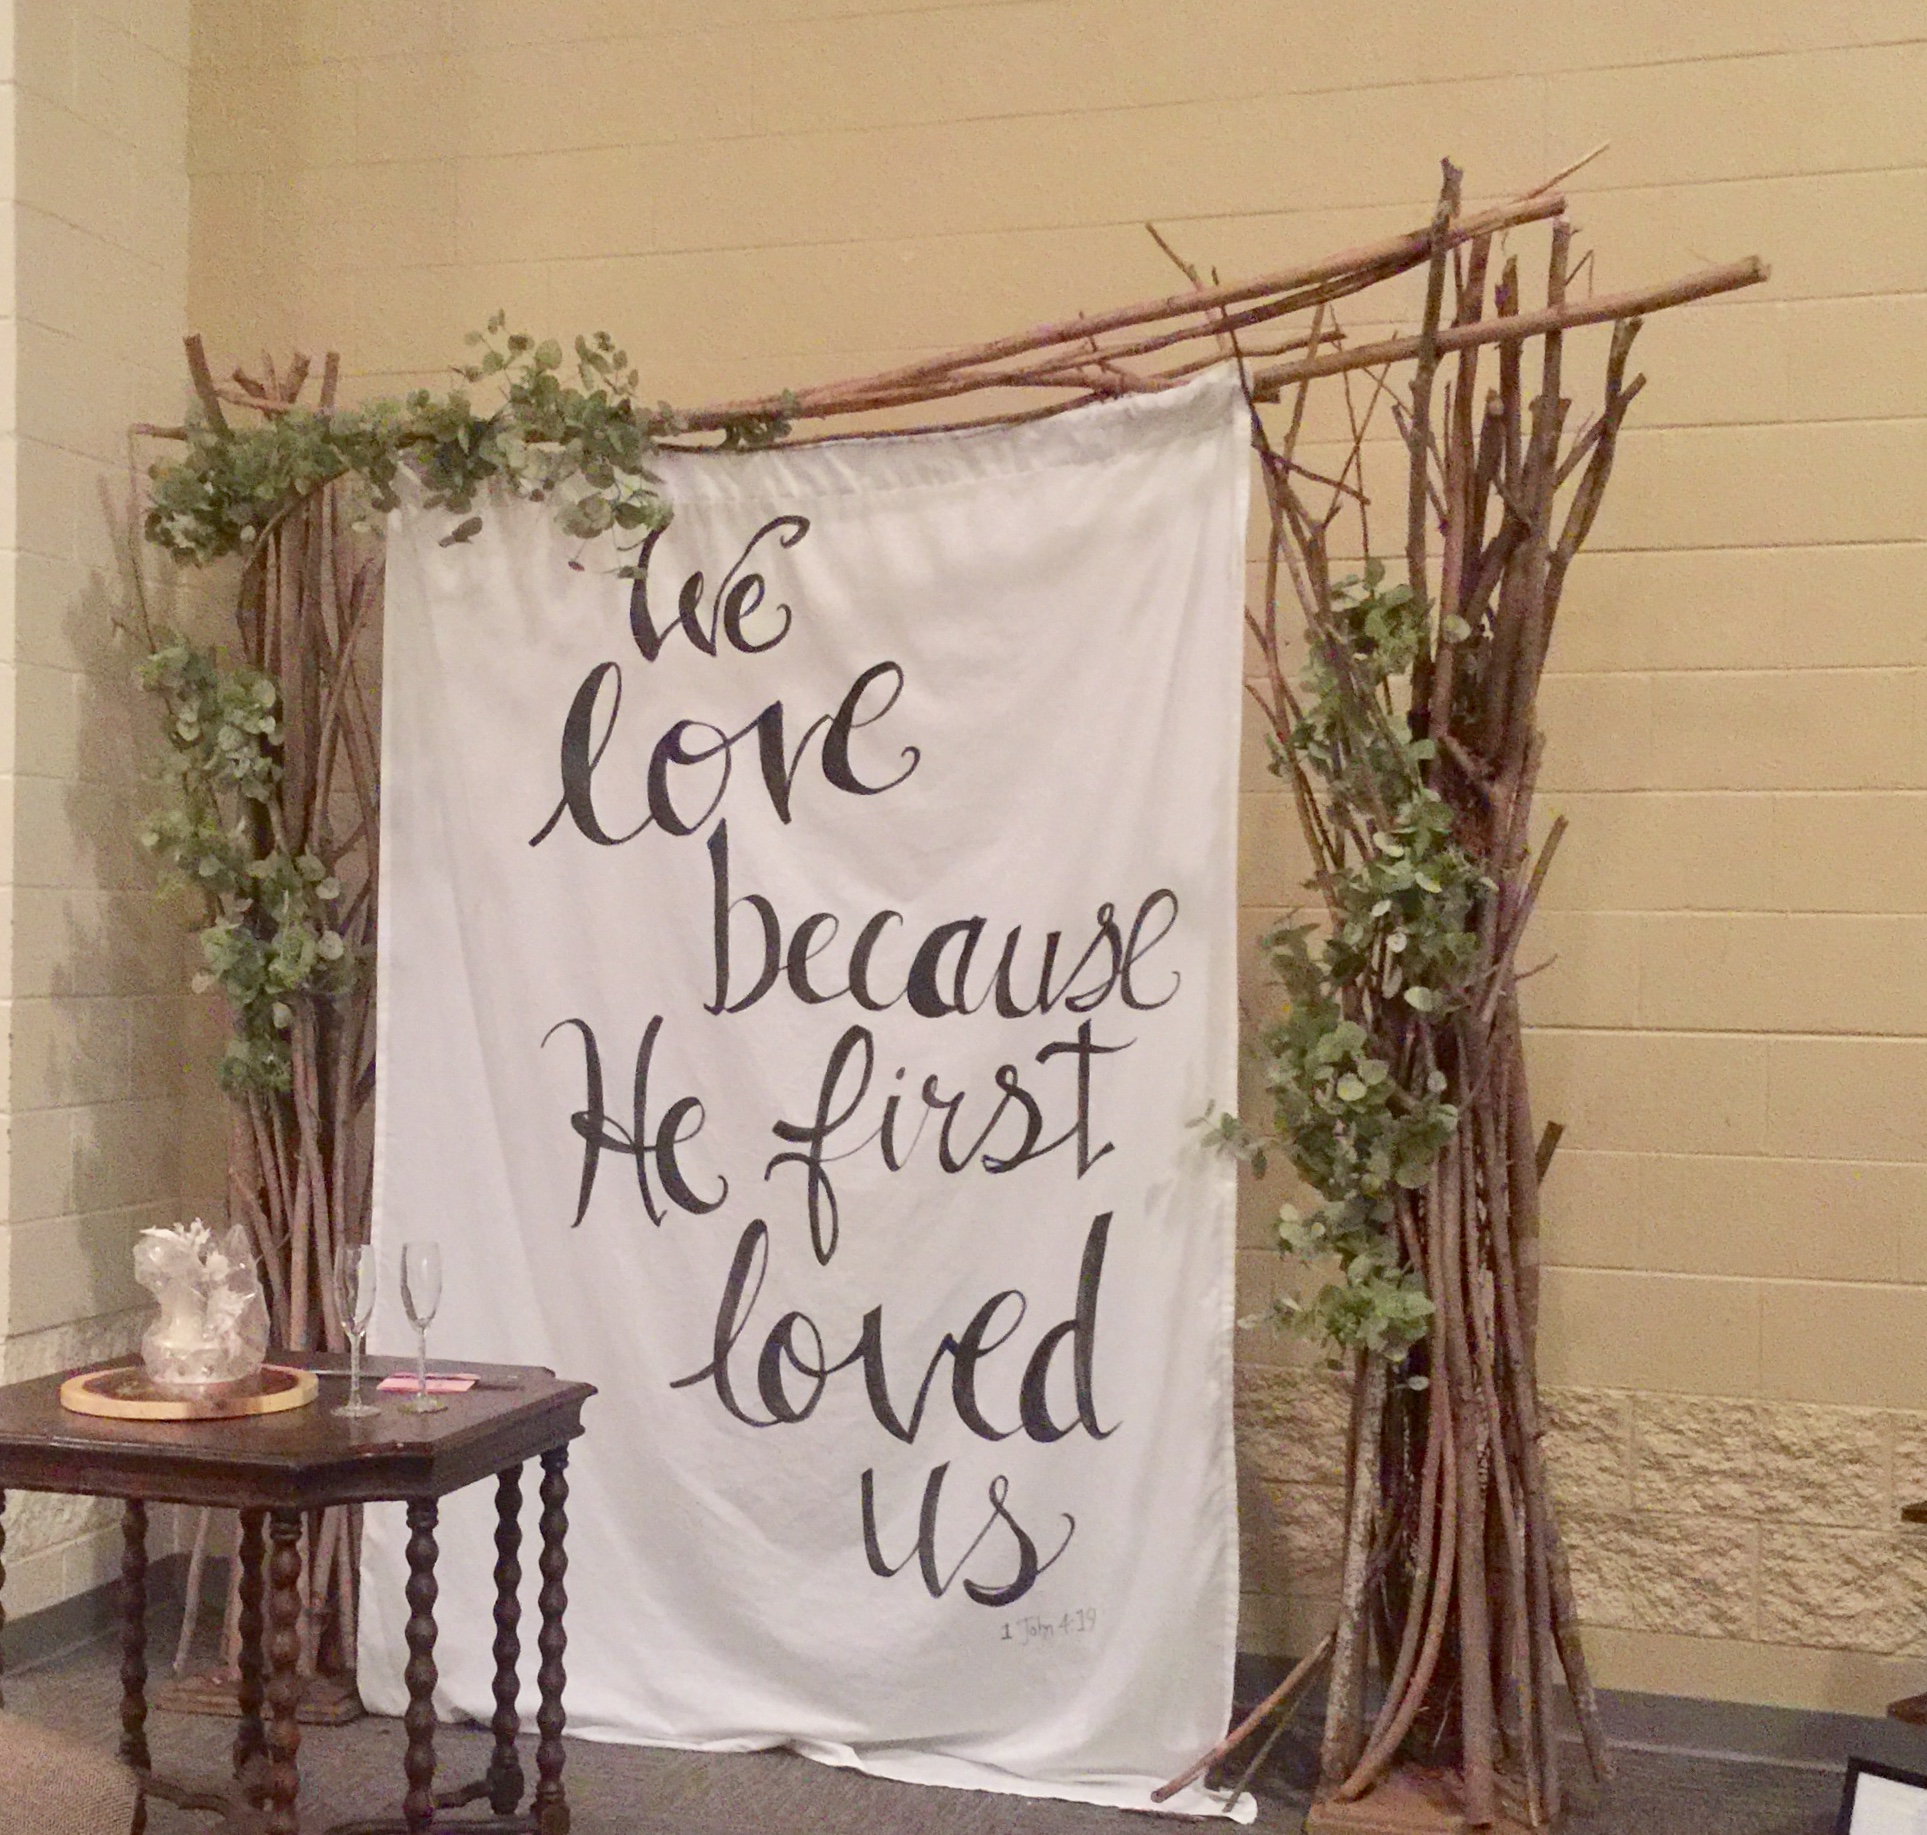  Bible verse painted on a bed sheet  